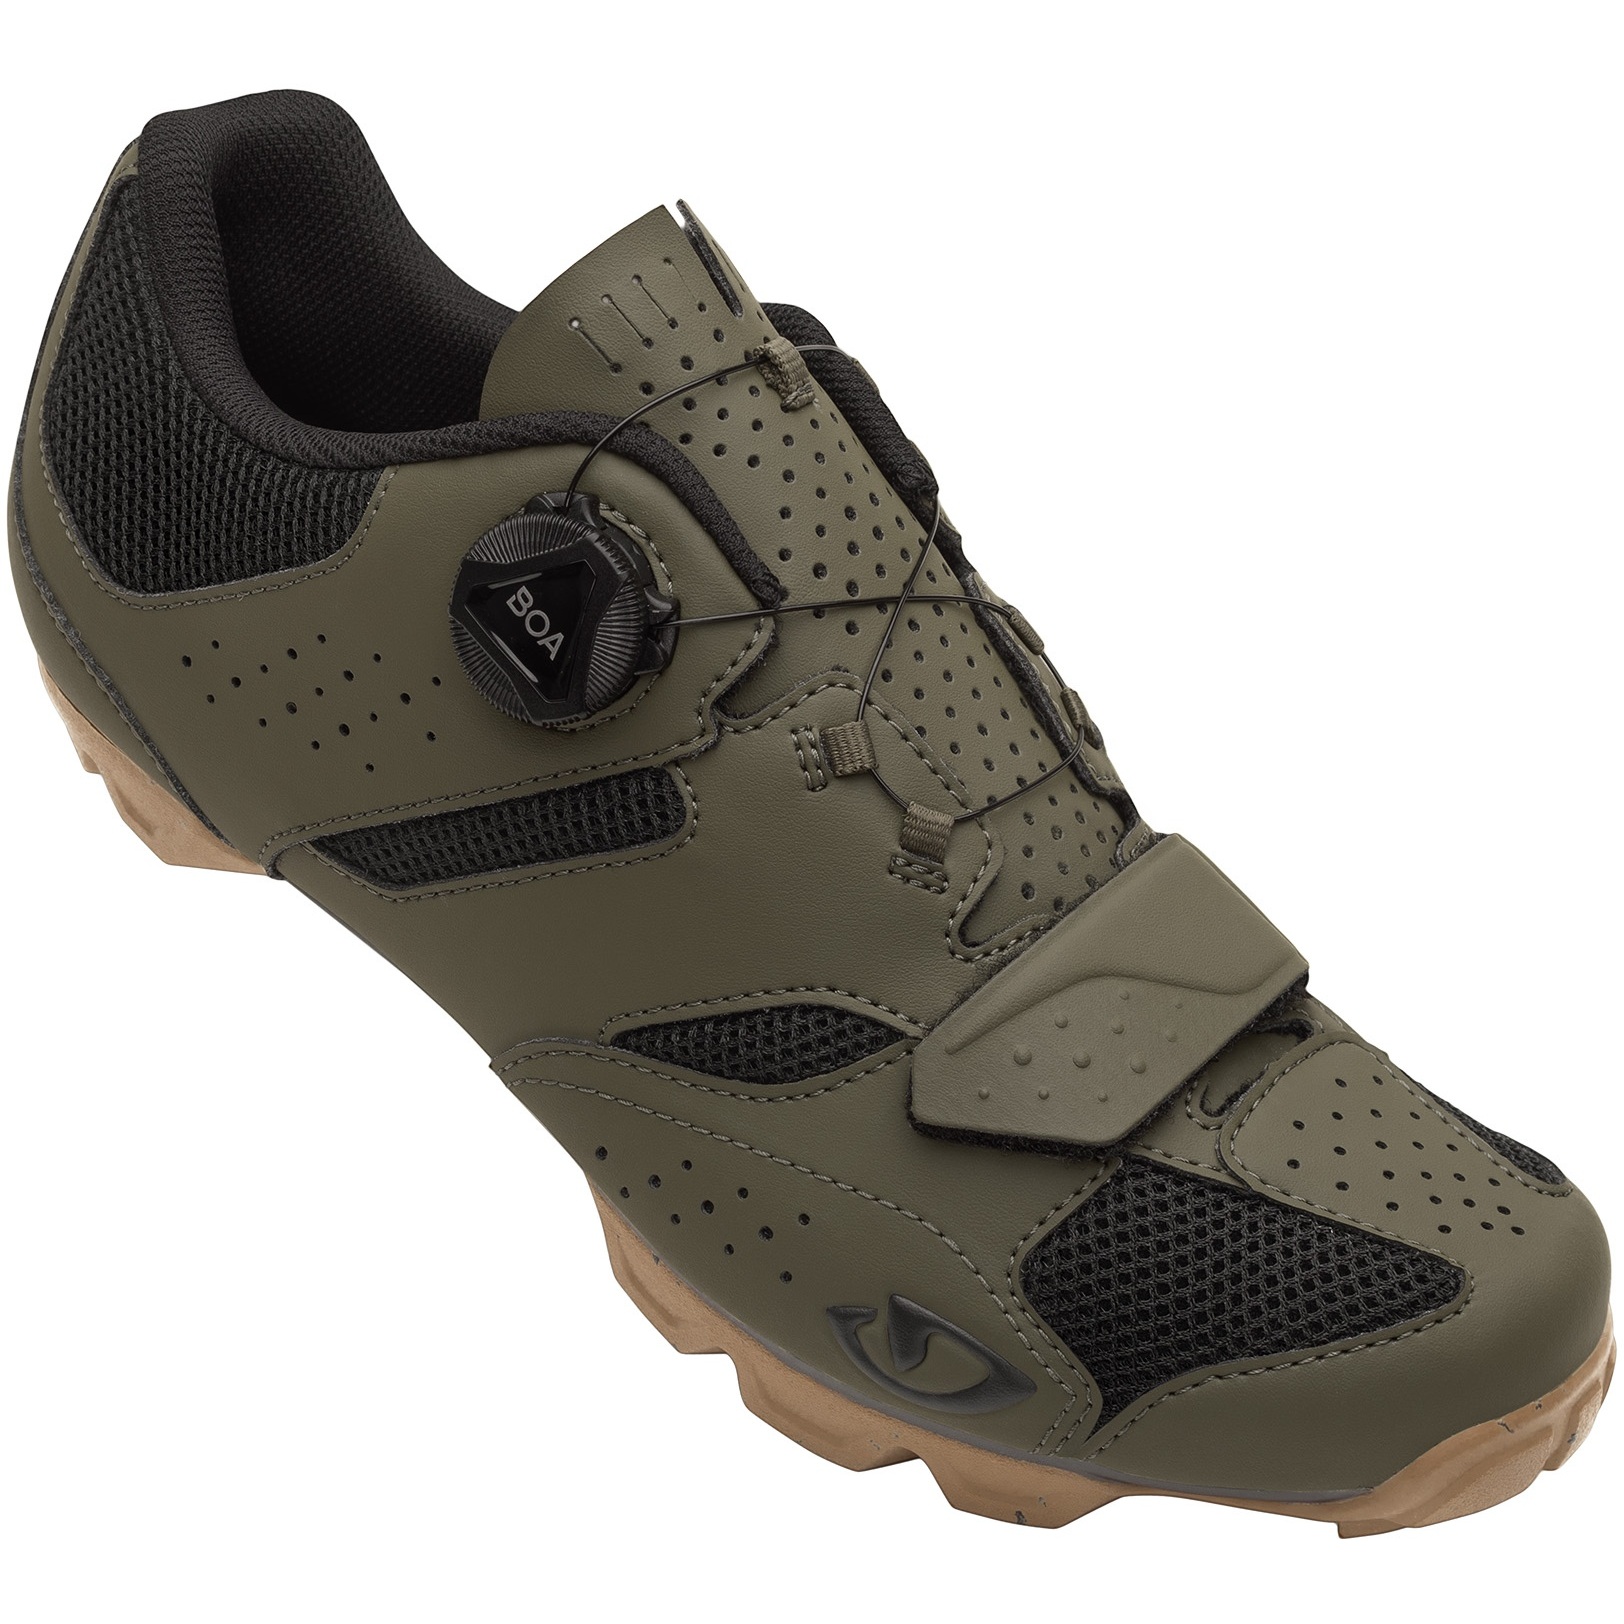 Picture of Giro Cylinder II MTB Shoes - olive/gum